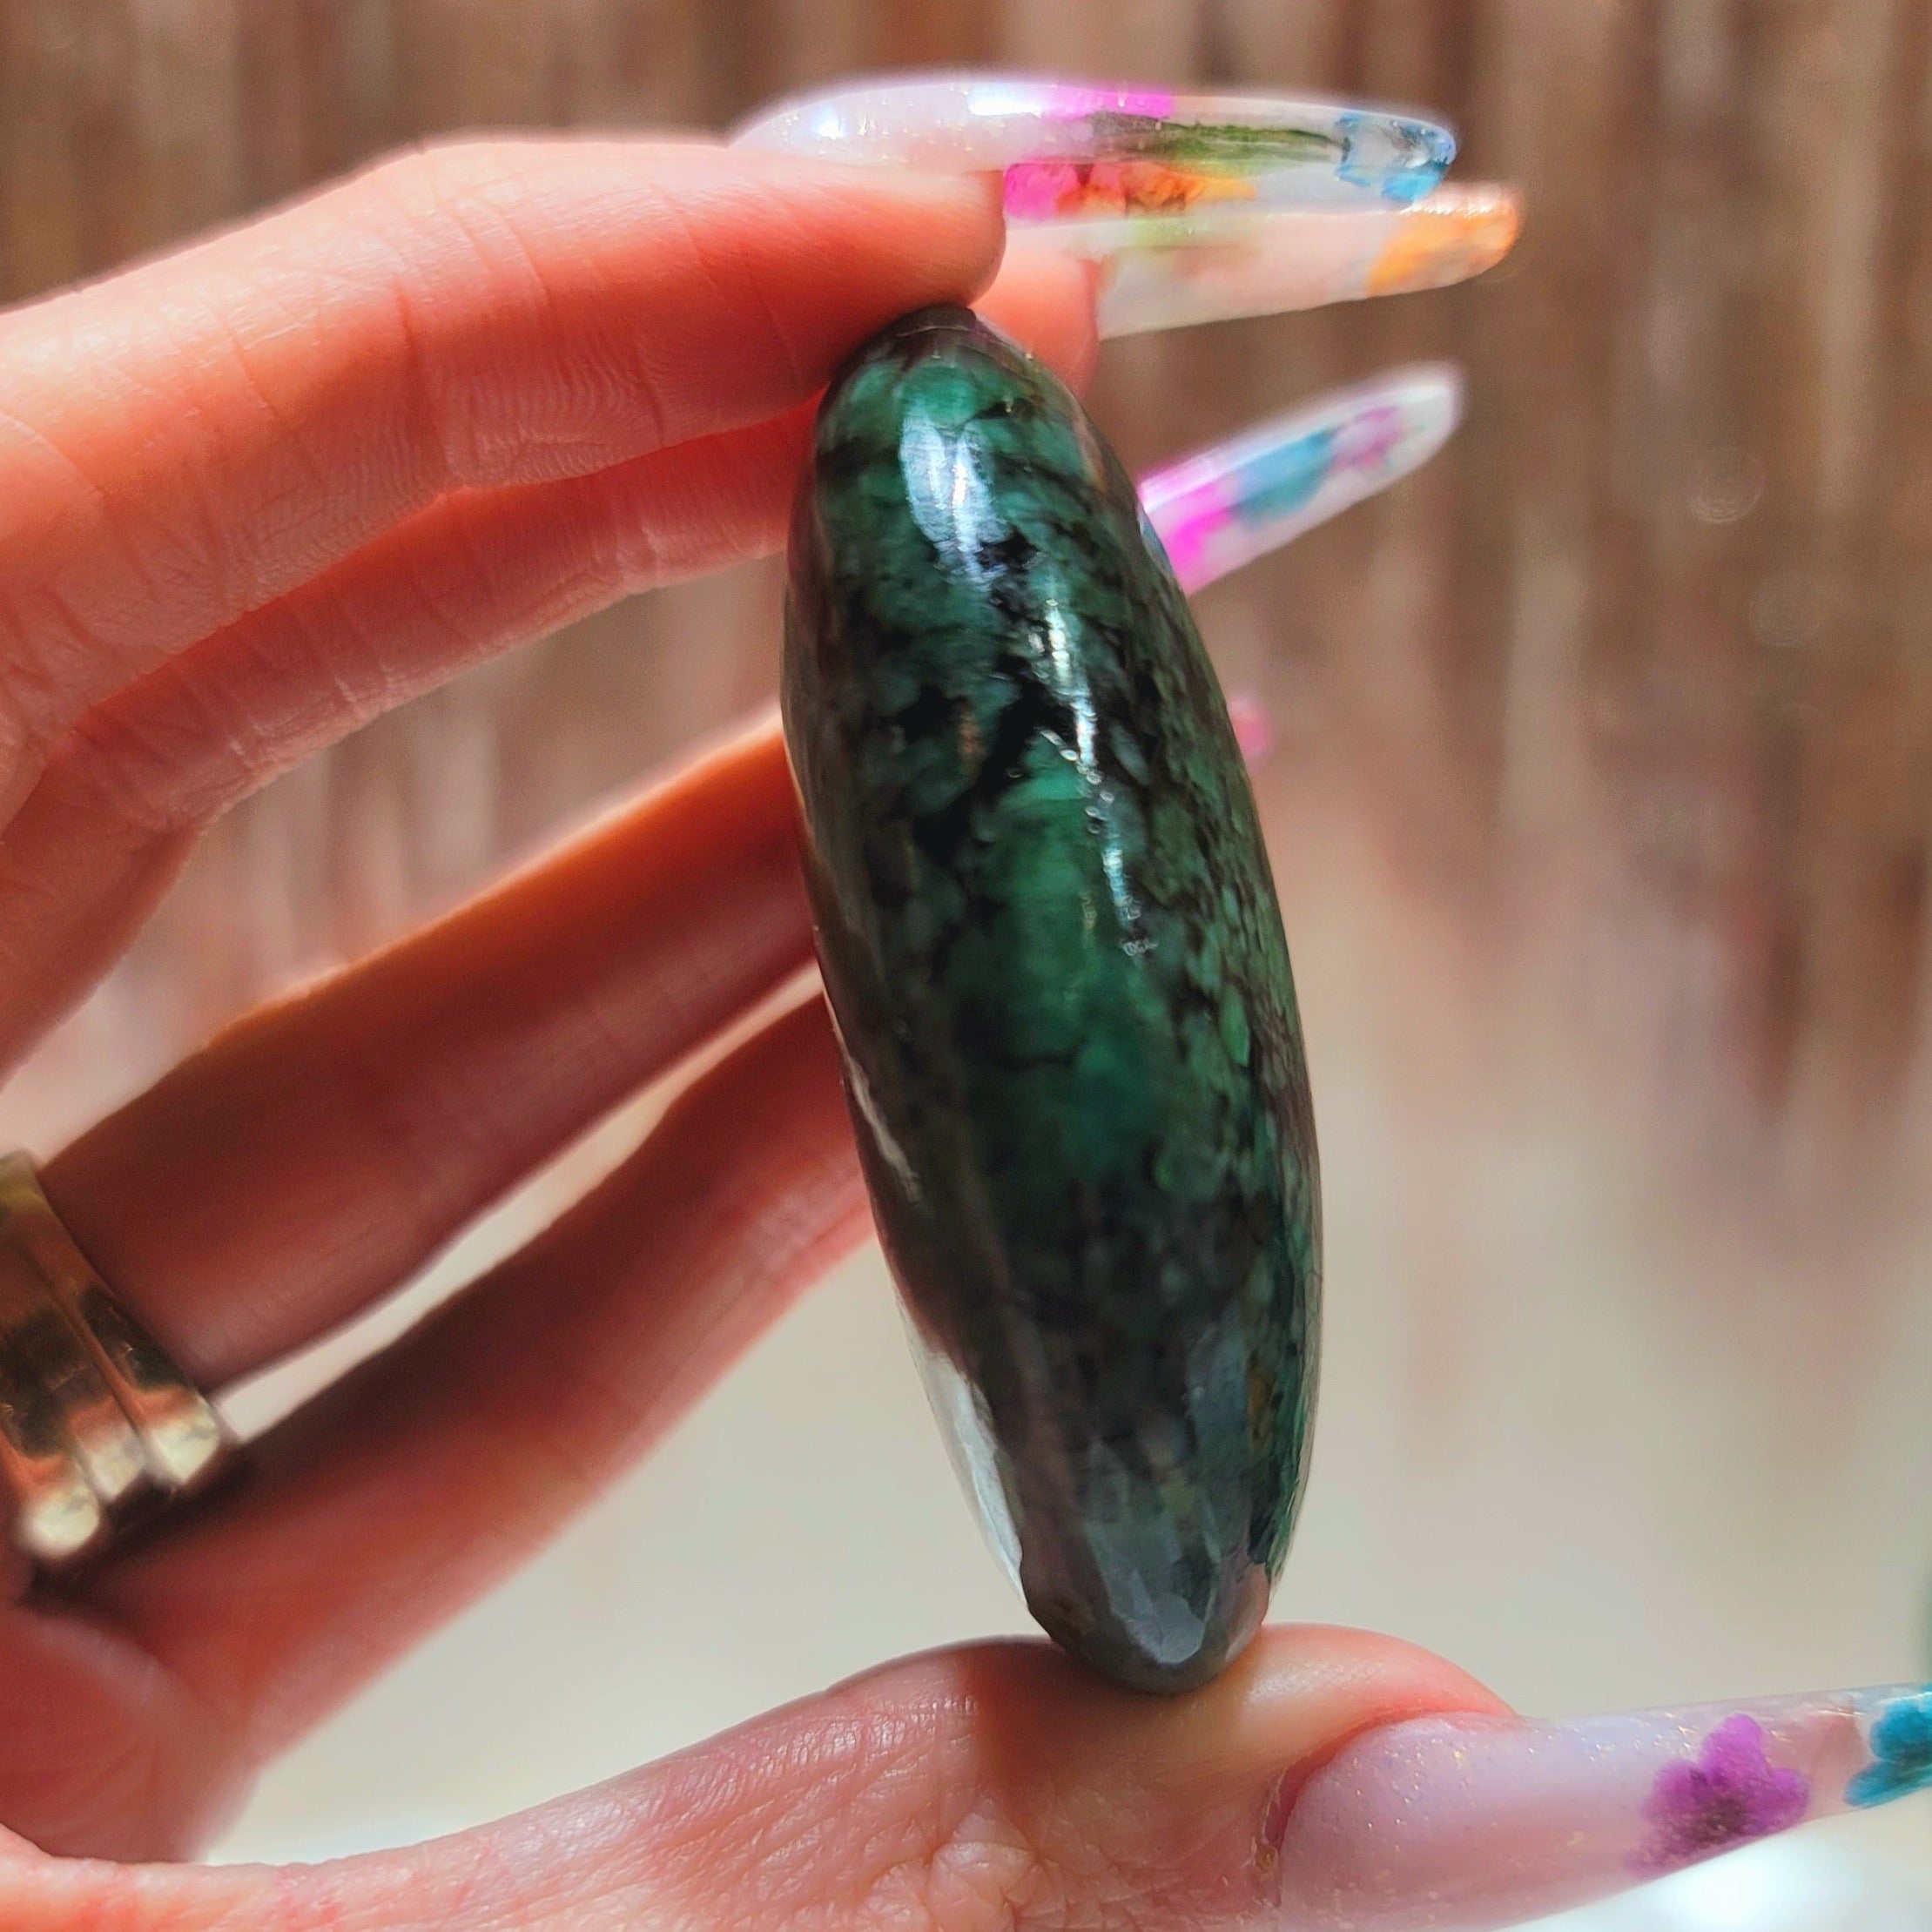 Emerald Palm for Abundance, Love and Wealth